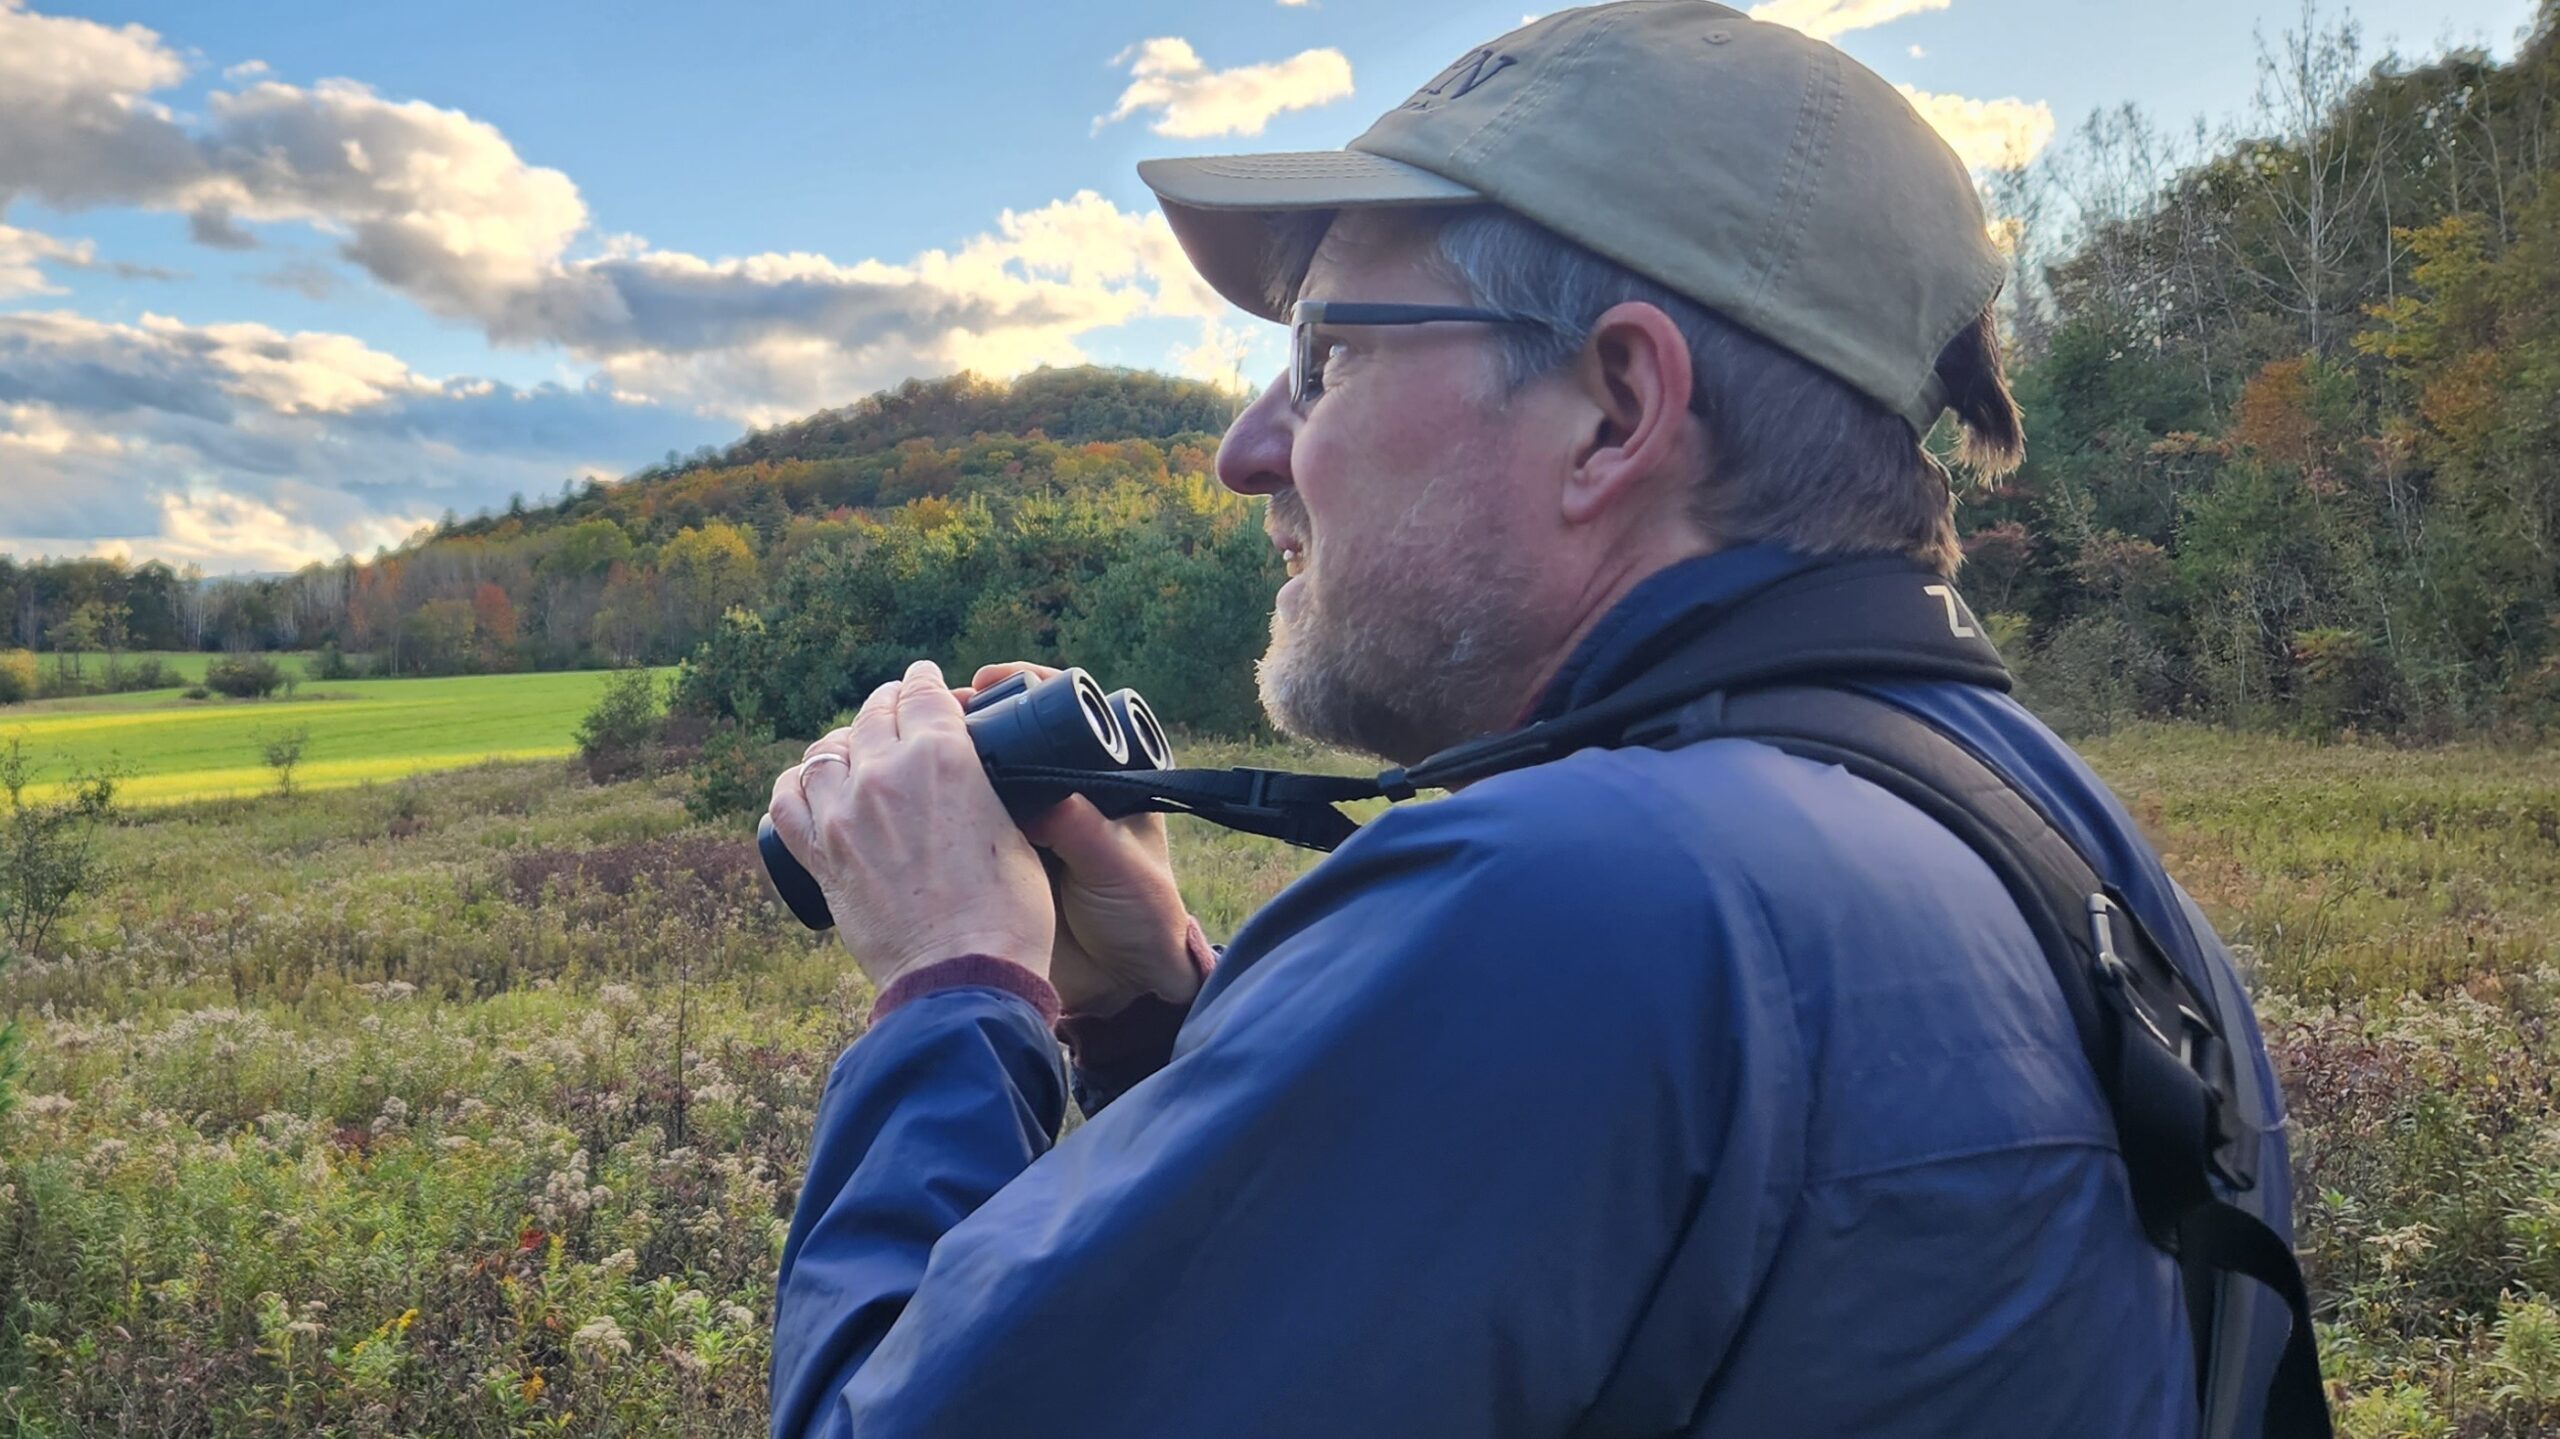 A naturalist finds hope despite climate change in an era he calls ‘The End of Eden’